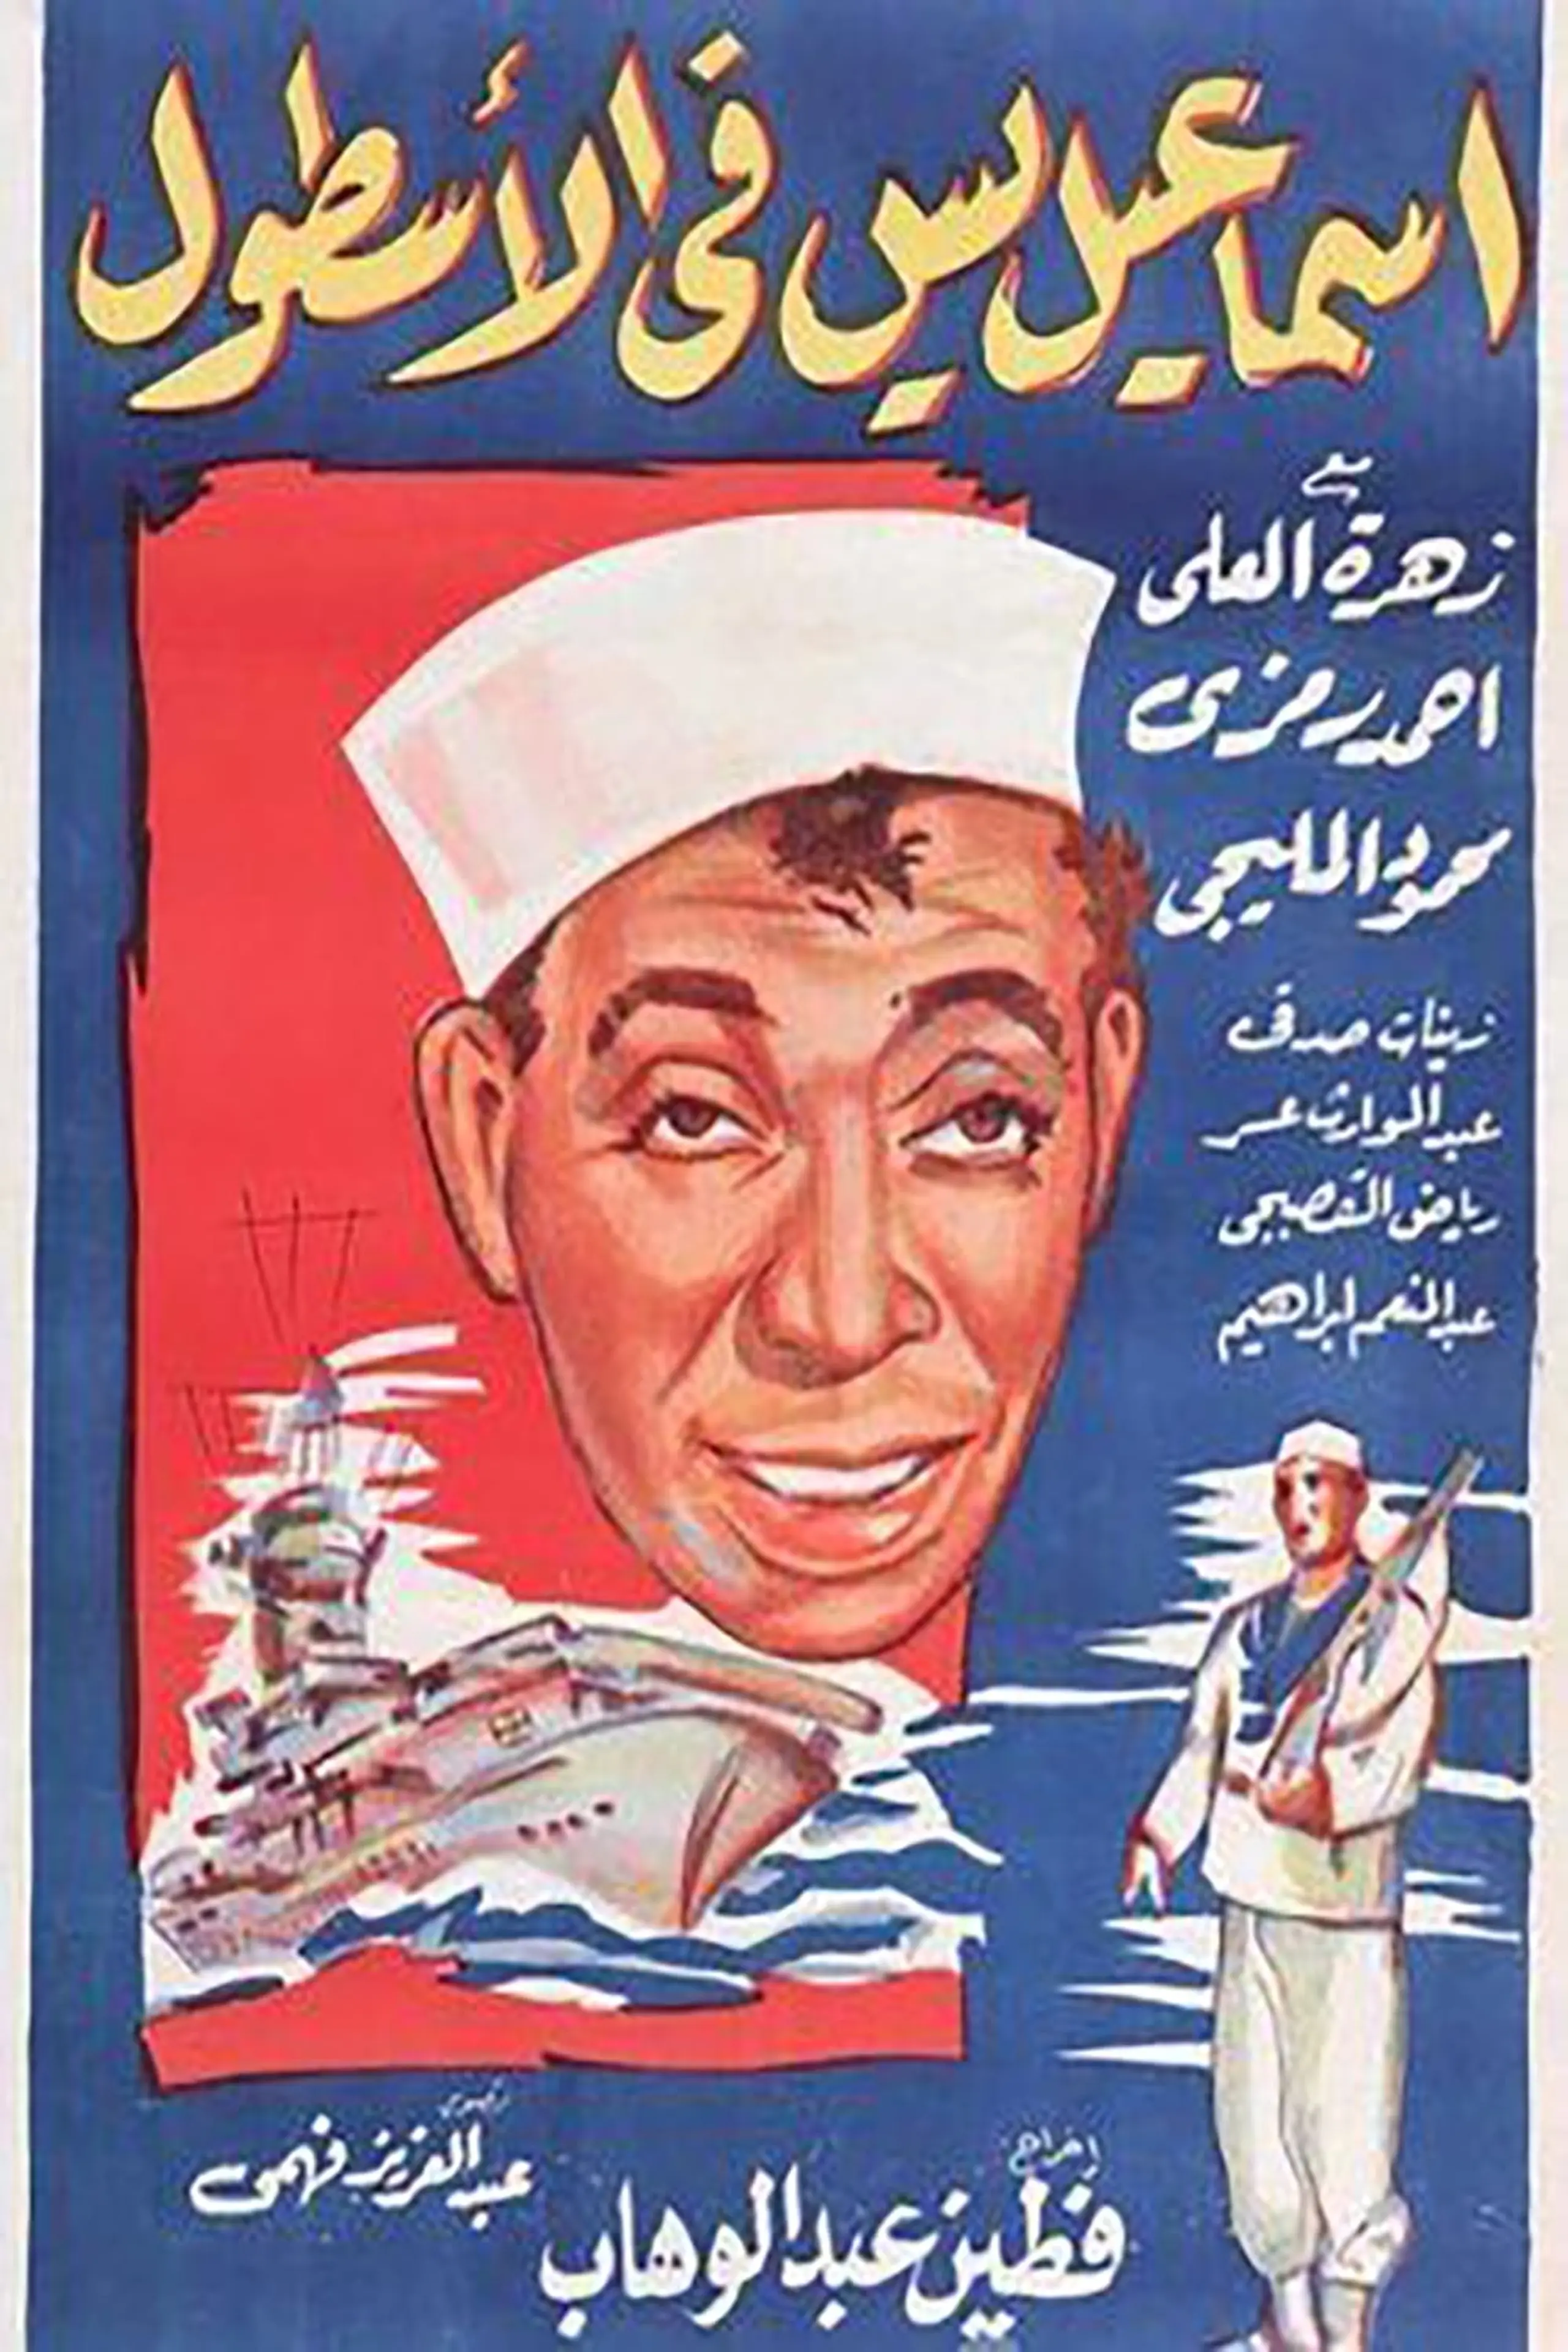 Ismail Yassine in the Navy